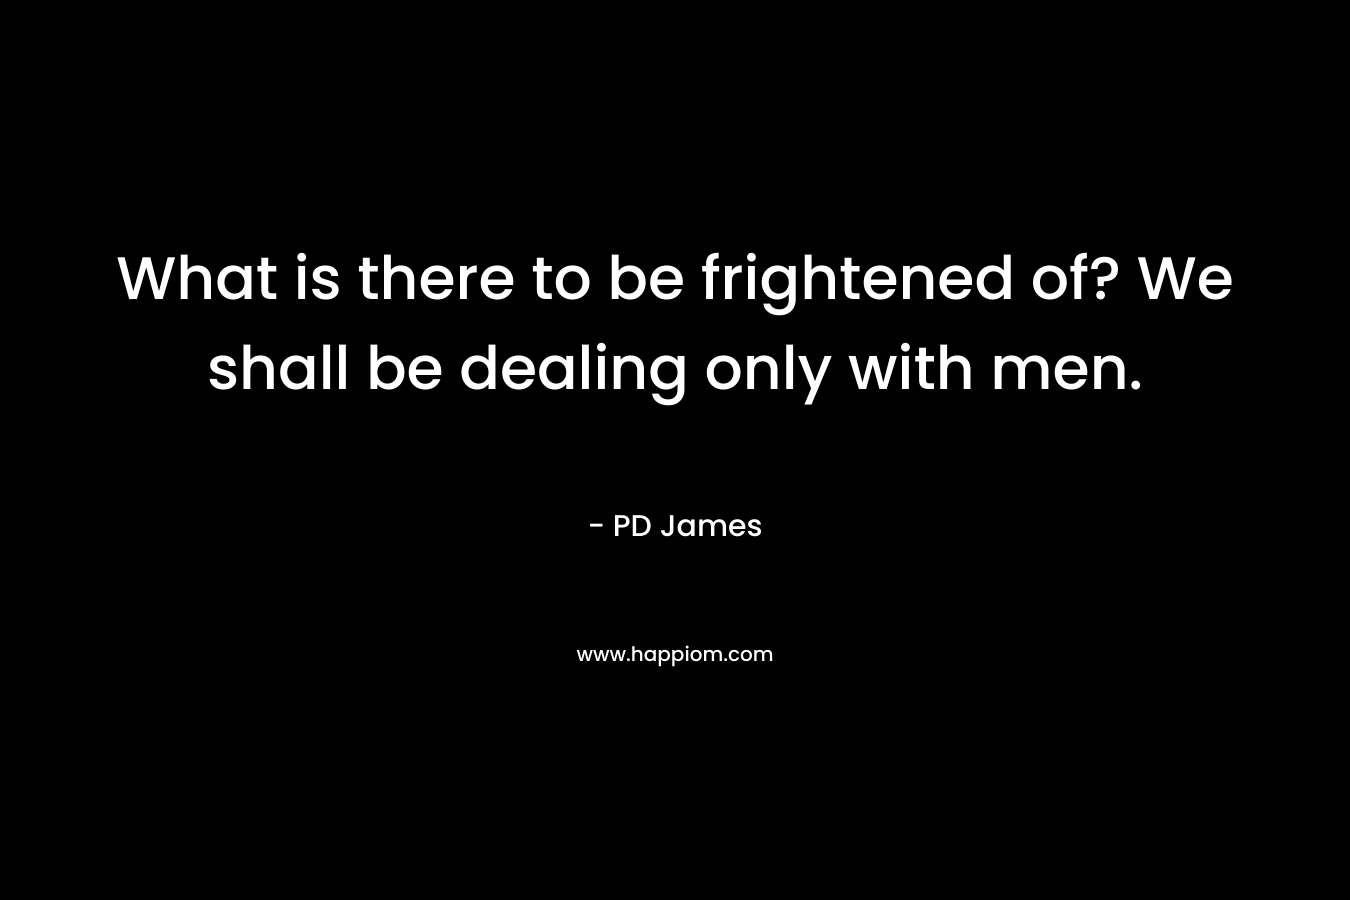 What is there to be frightened of? We shall be dealing only with men. – PD James